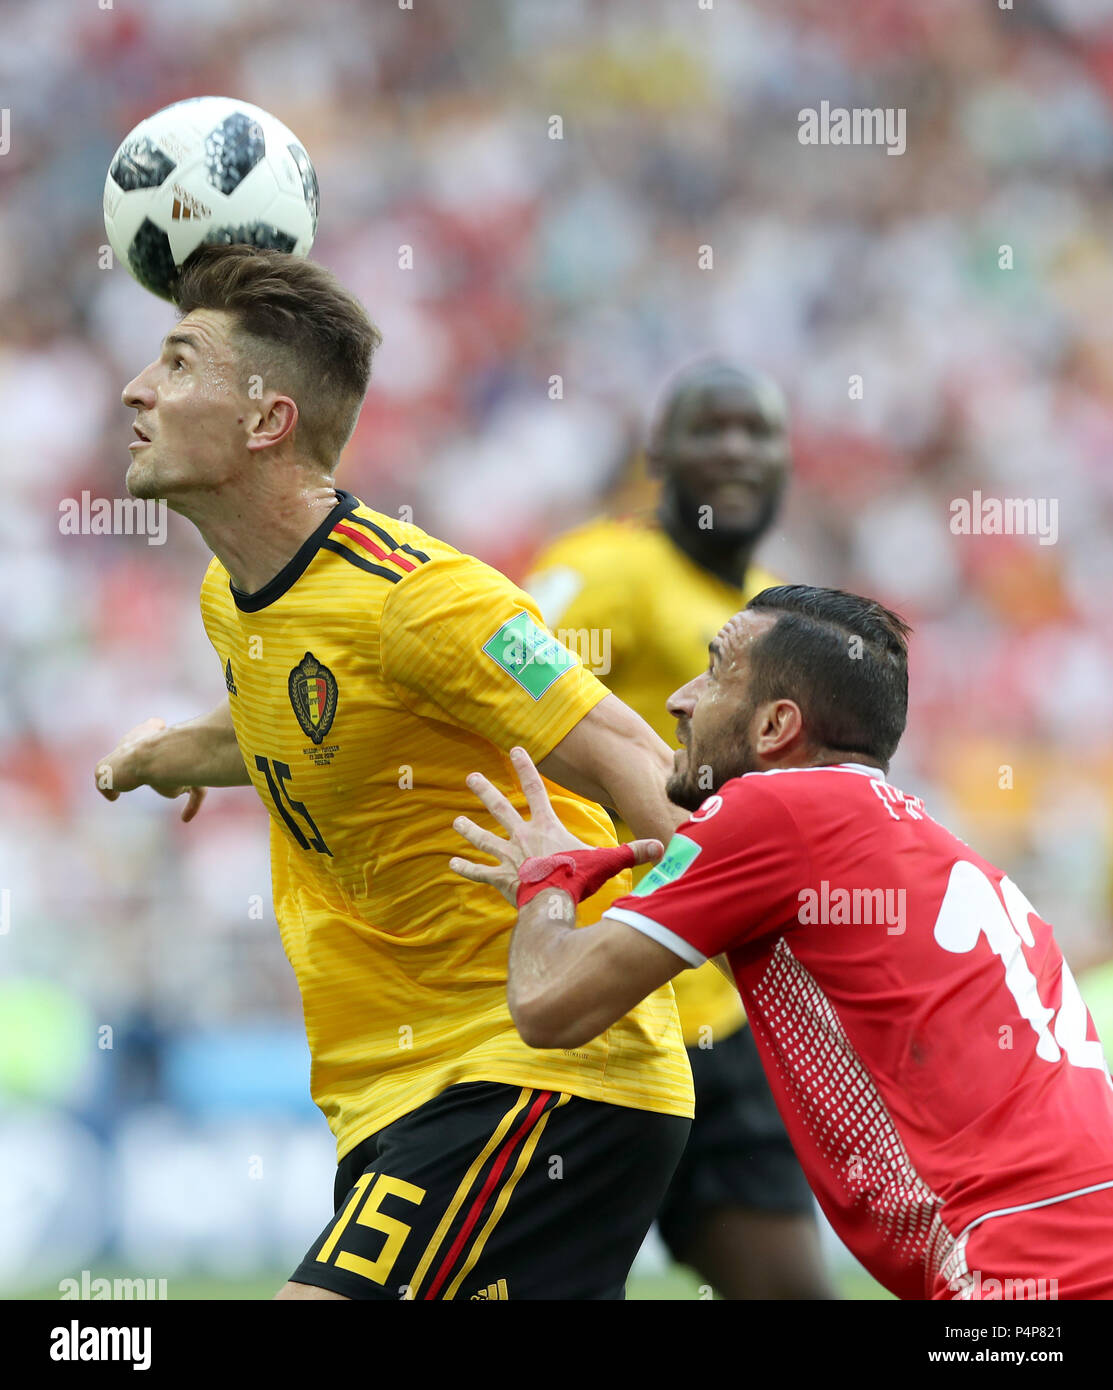 Moscow, Russia. 23rd June, 2018. Thomas Meunier (L) of Belgium competes for a header during the 2018 FIFA World Cup Group G match between Belgium and Tunisia in Moscow, Russia, June 23, 2018. Credit: Xu Zijian/Xinhua/Alamy Live News Stock Photo